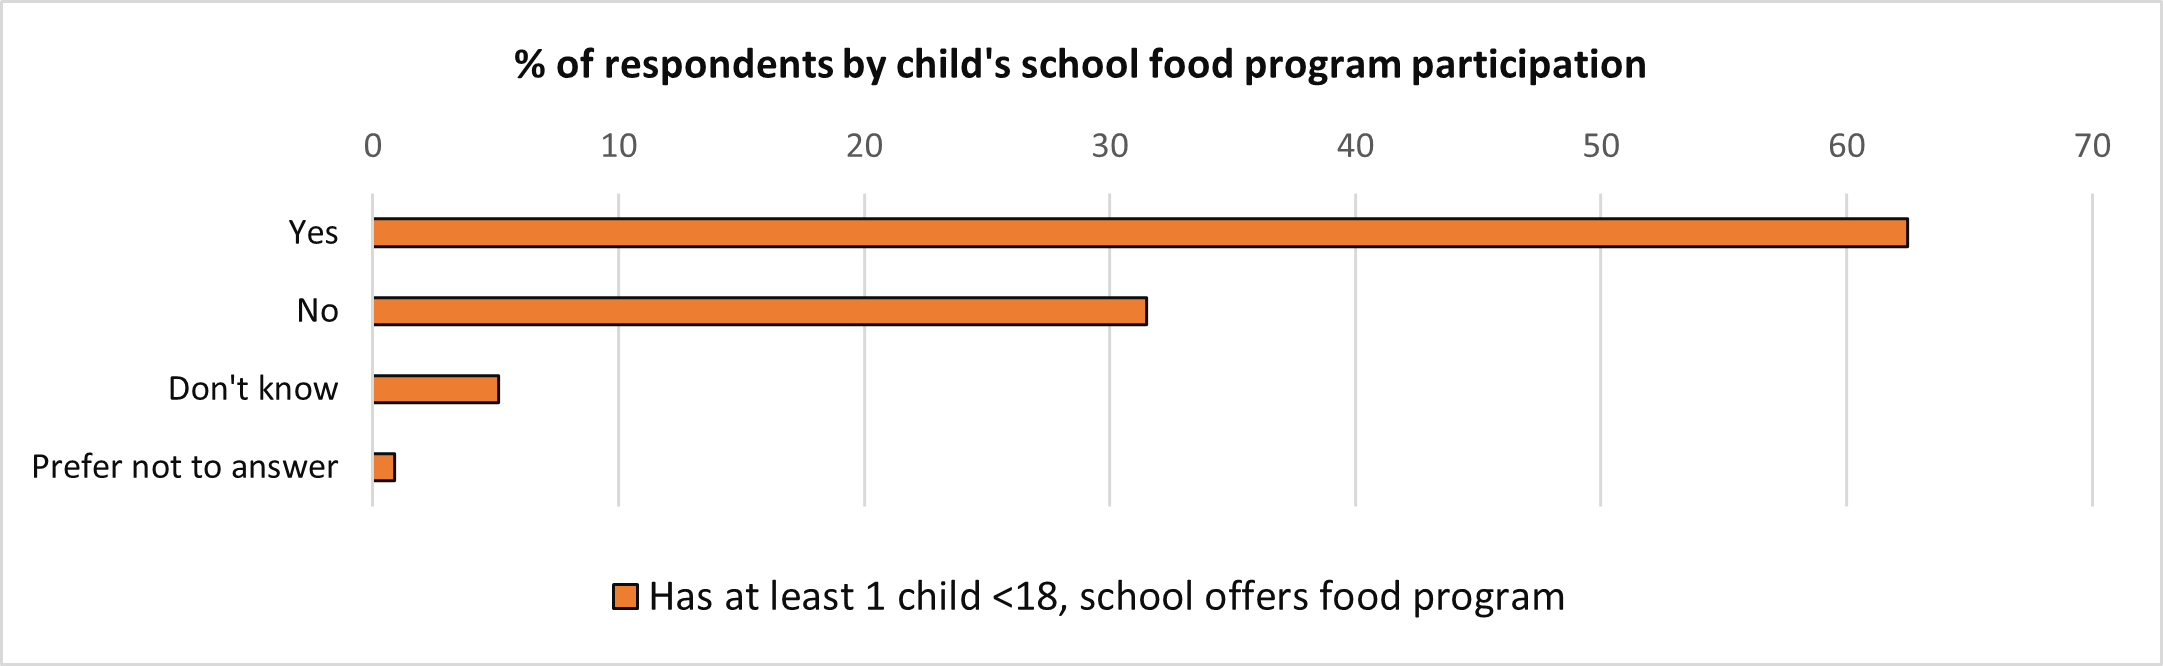 A bar chart of the percent of respondents by child’s school food program participation. Text version below.